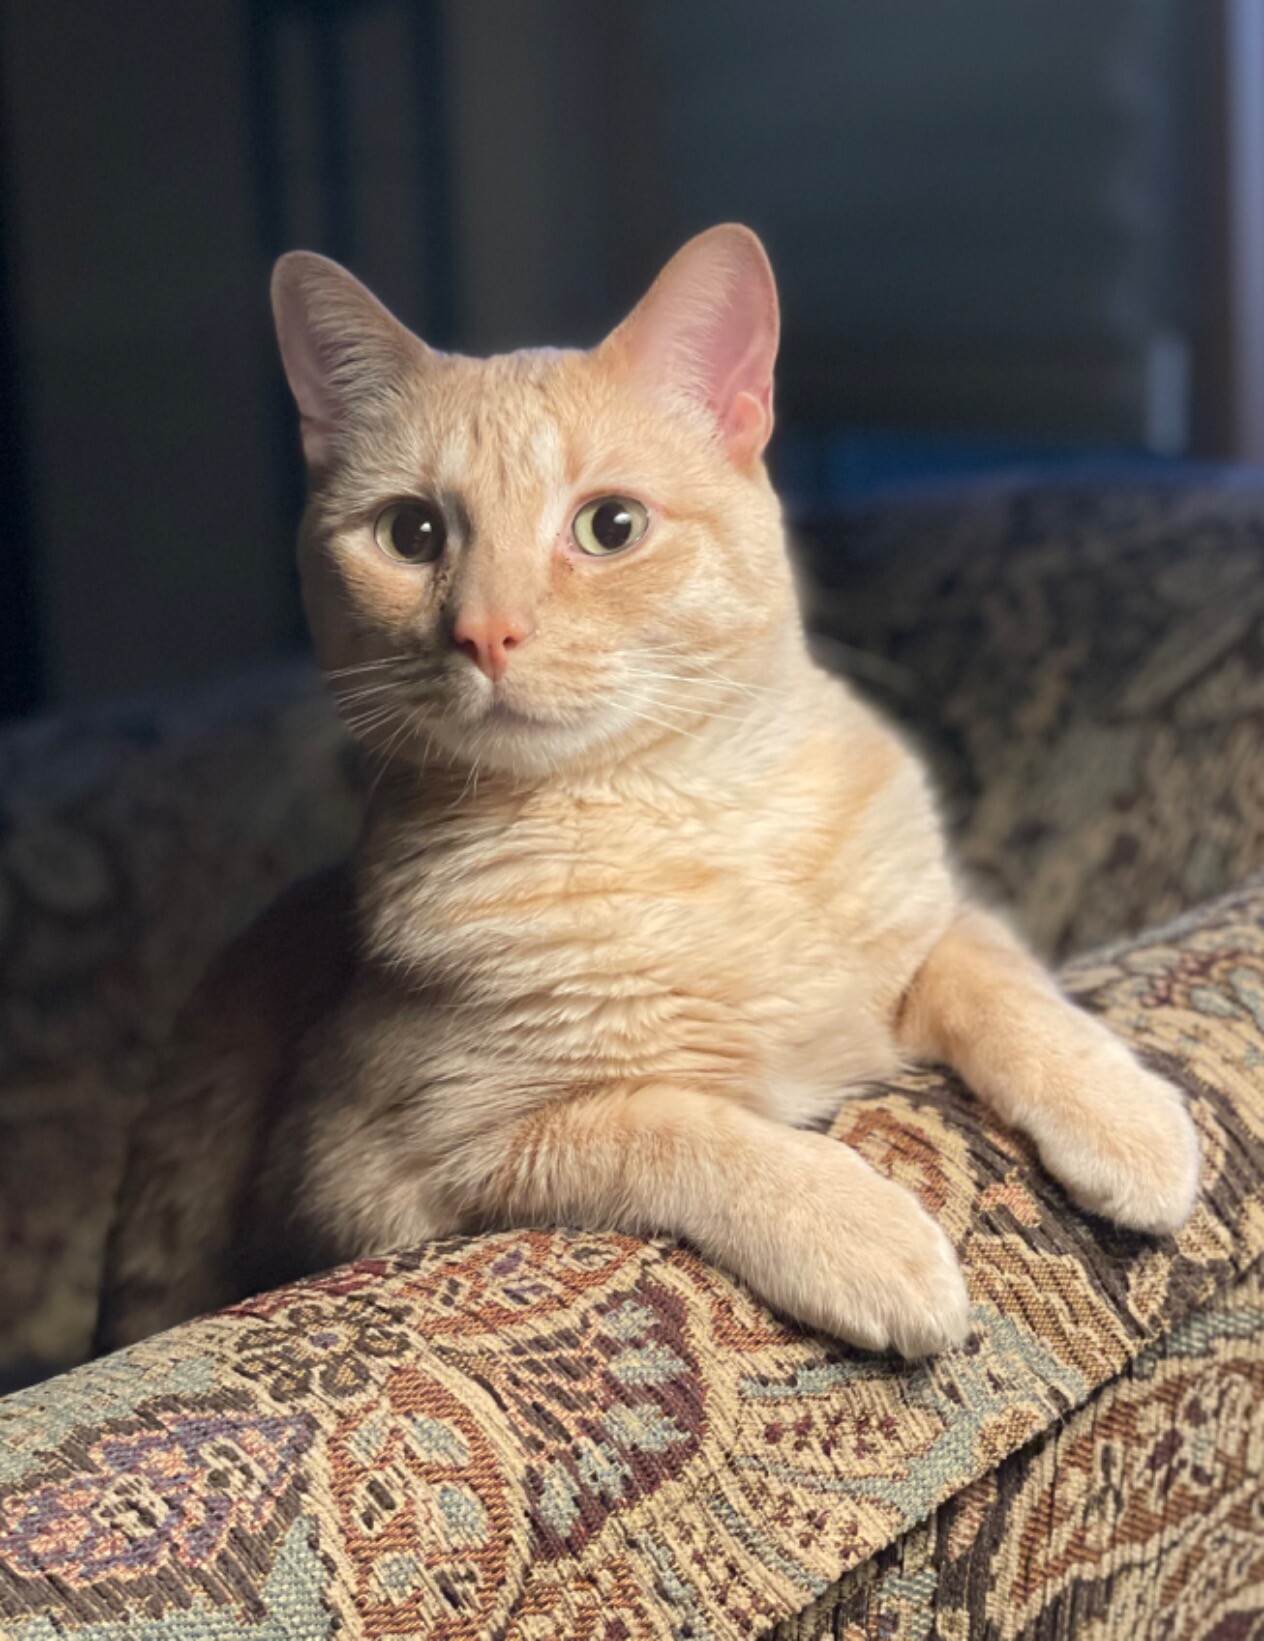 Orange tabby poses on an upholstered chair.